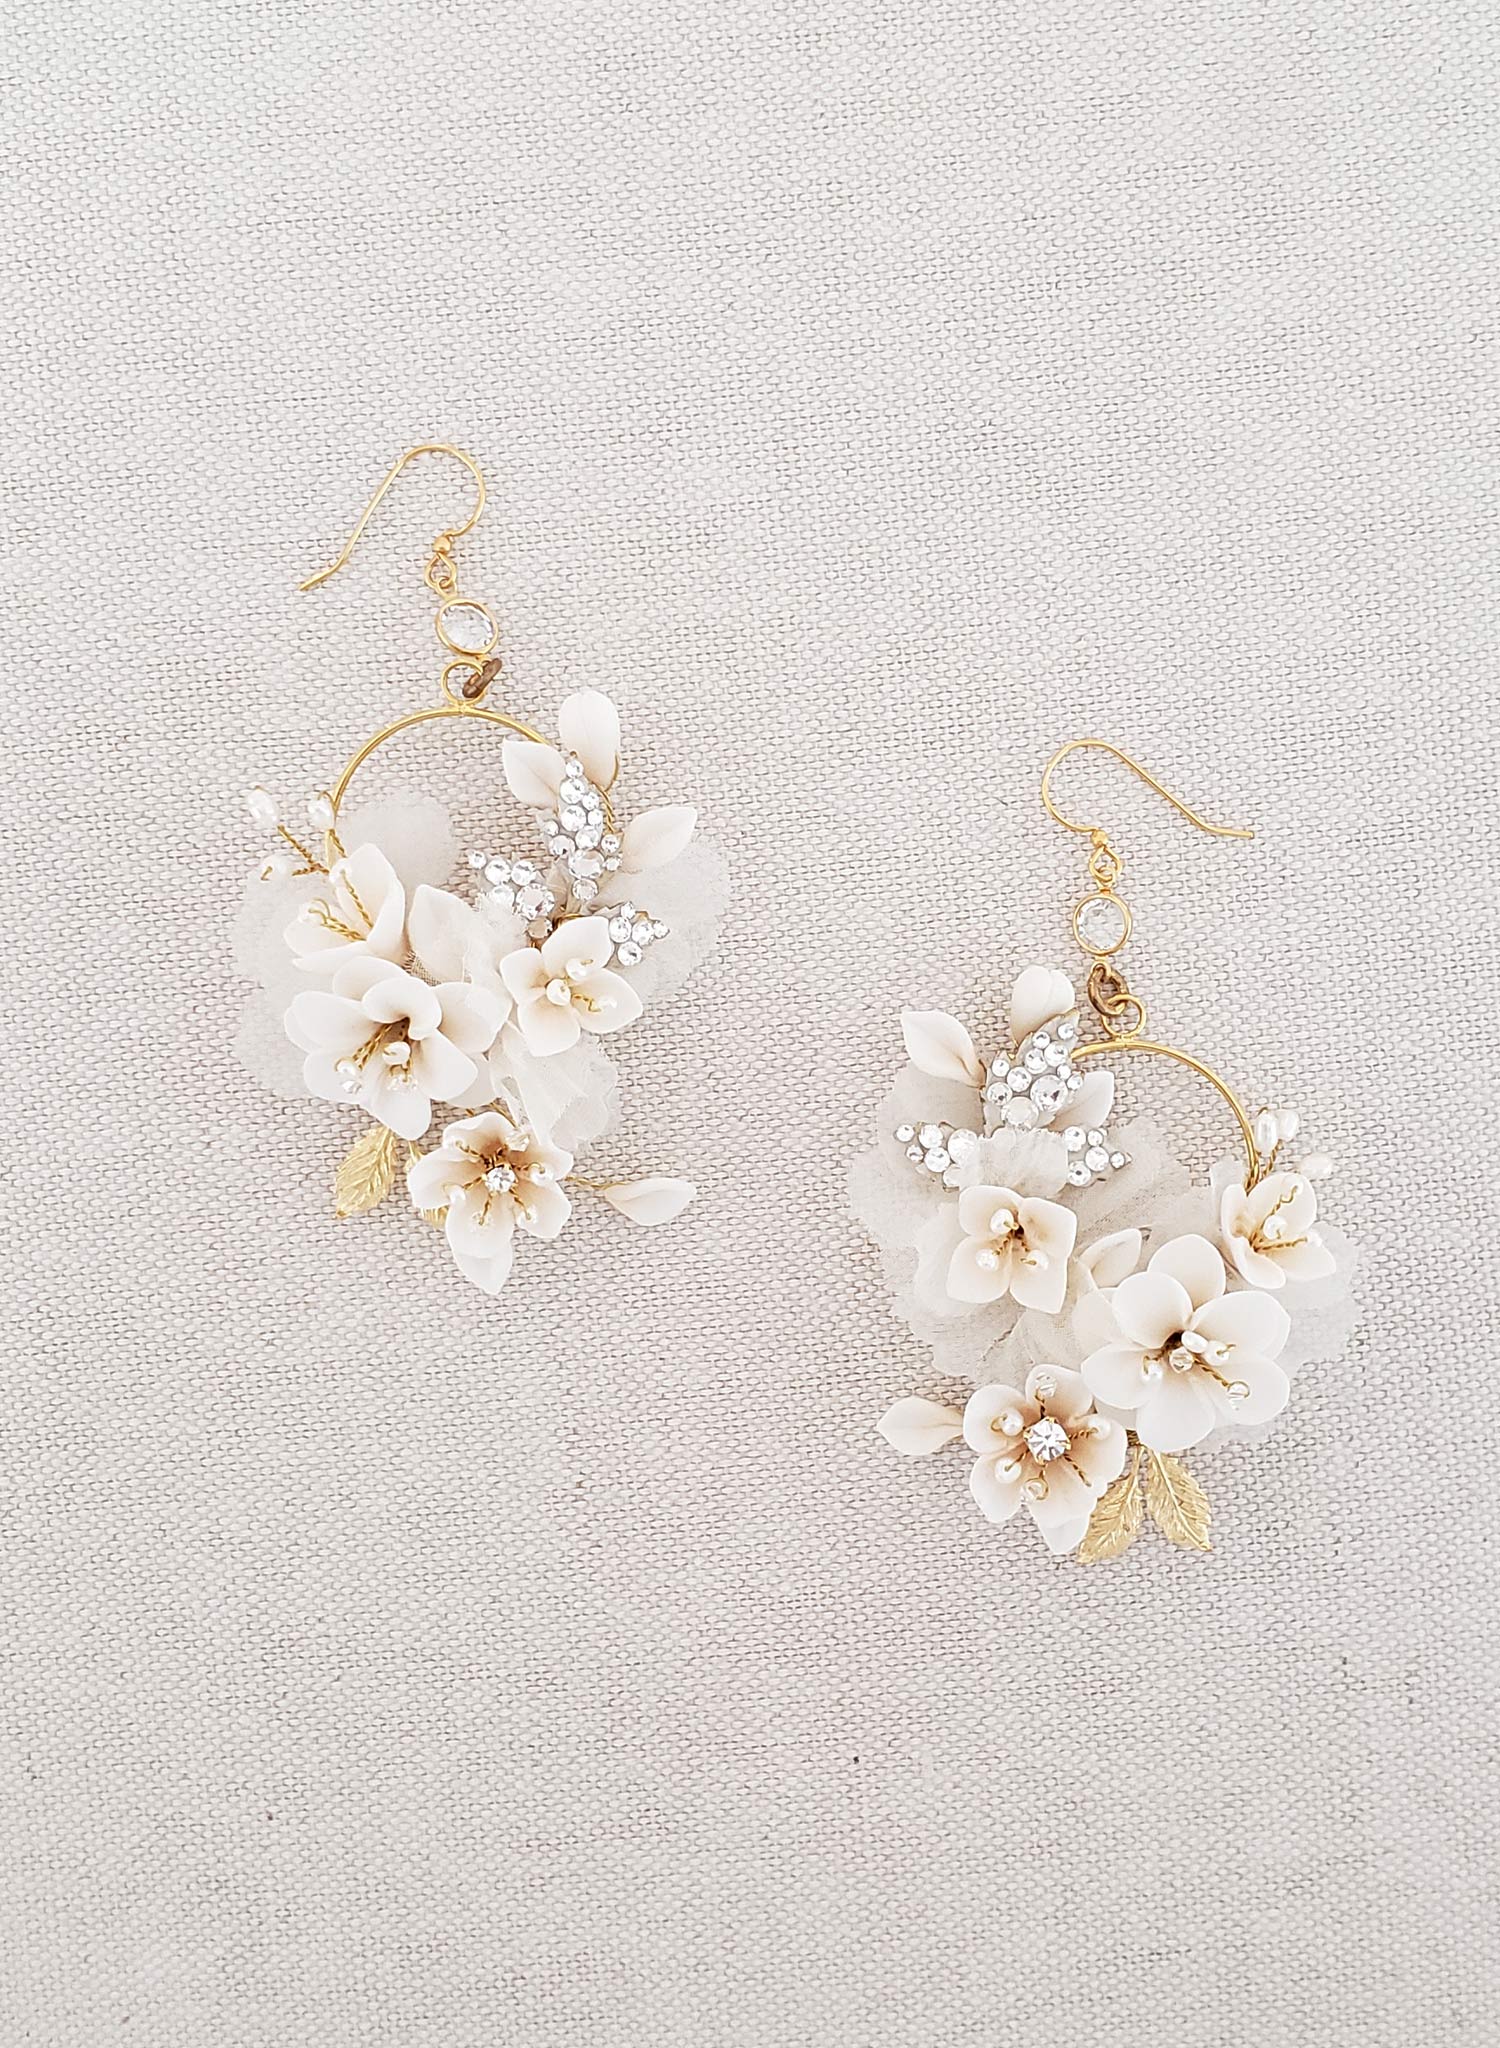 The Bridal Finerys Top 15 Bridal Earrings  The Bridal Finery